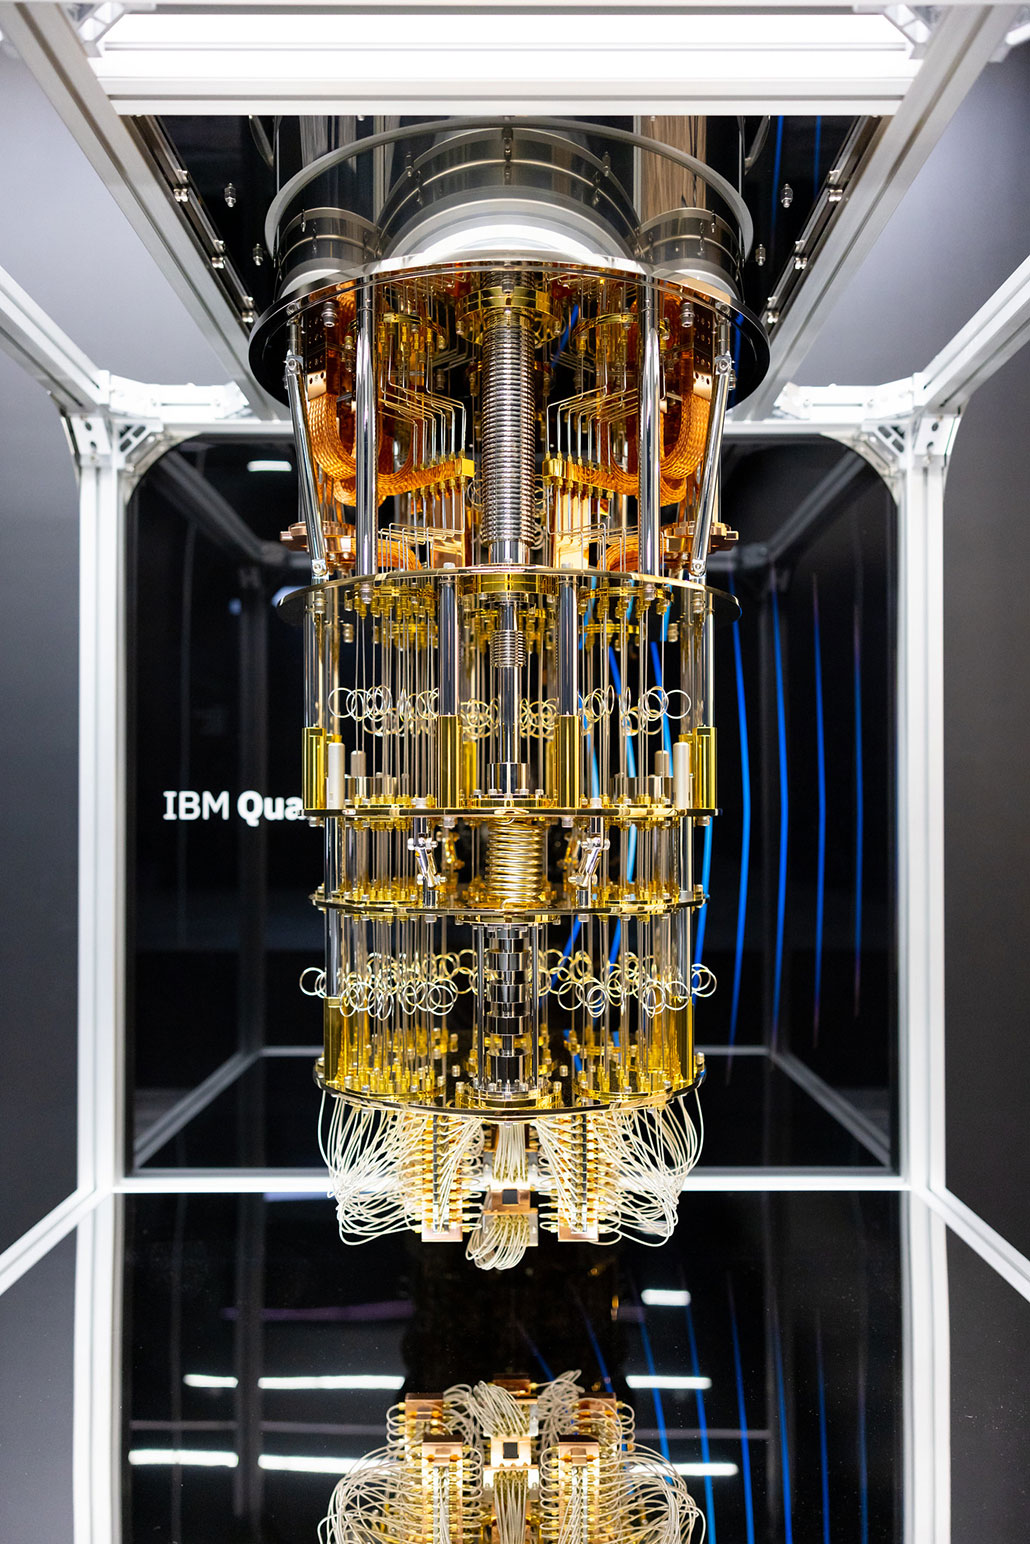 a photo of a Quantum computer machine, resembling a giant golden chandelier hanging from the ceiling